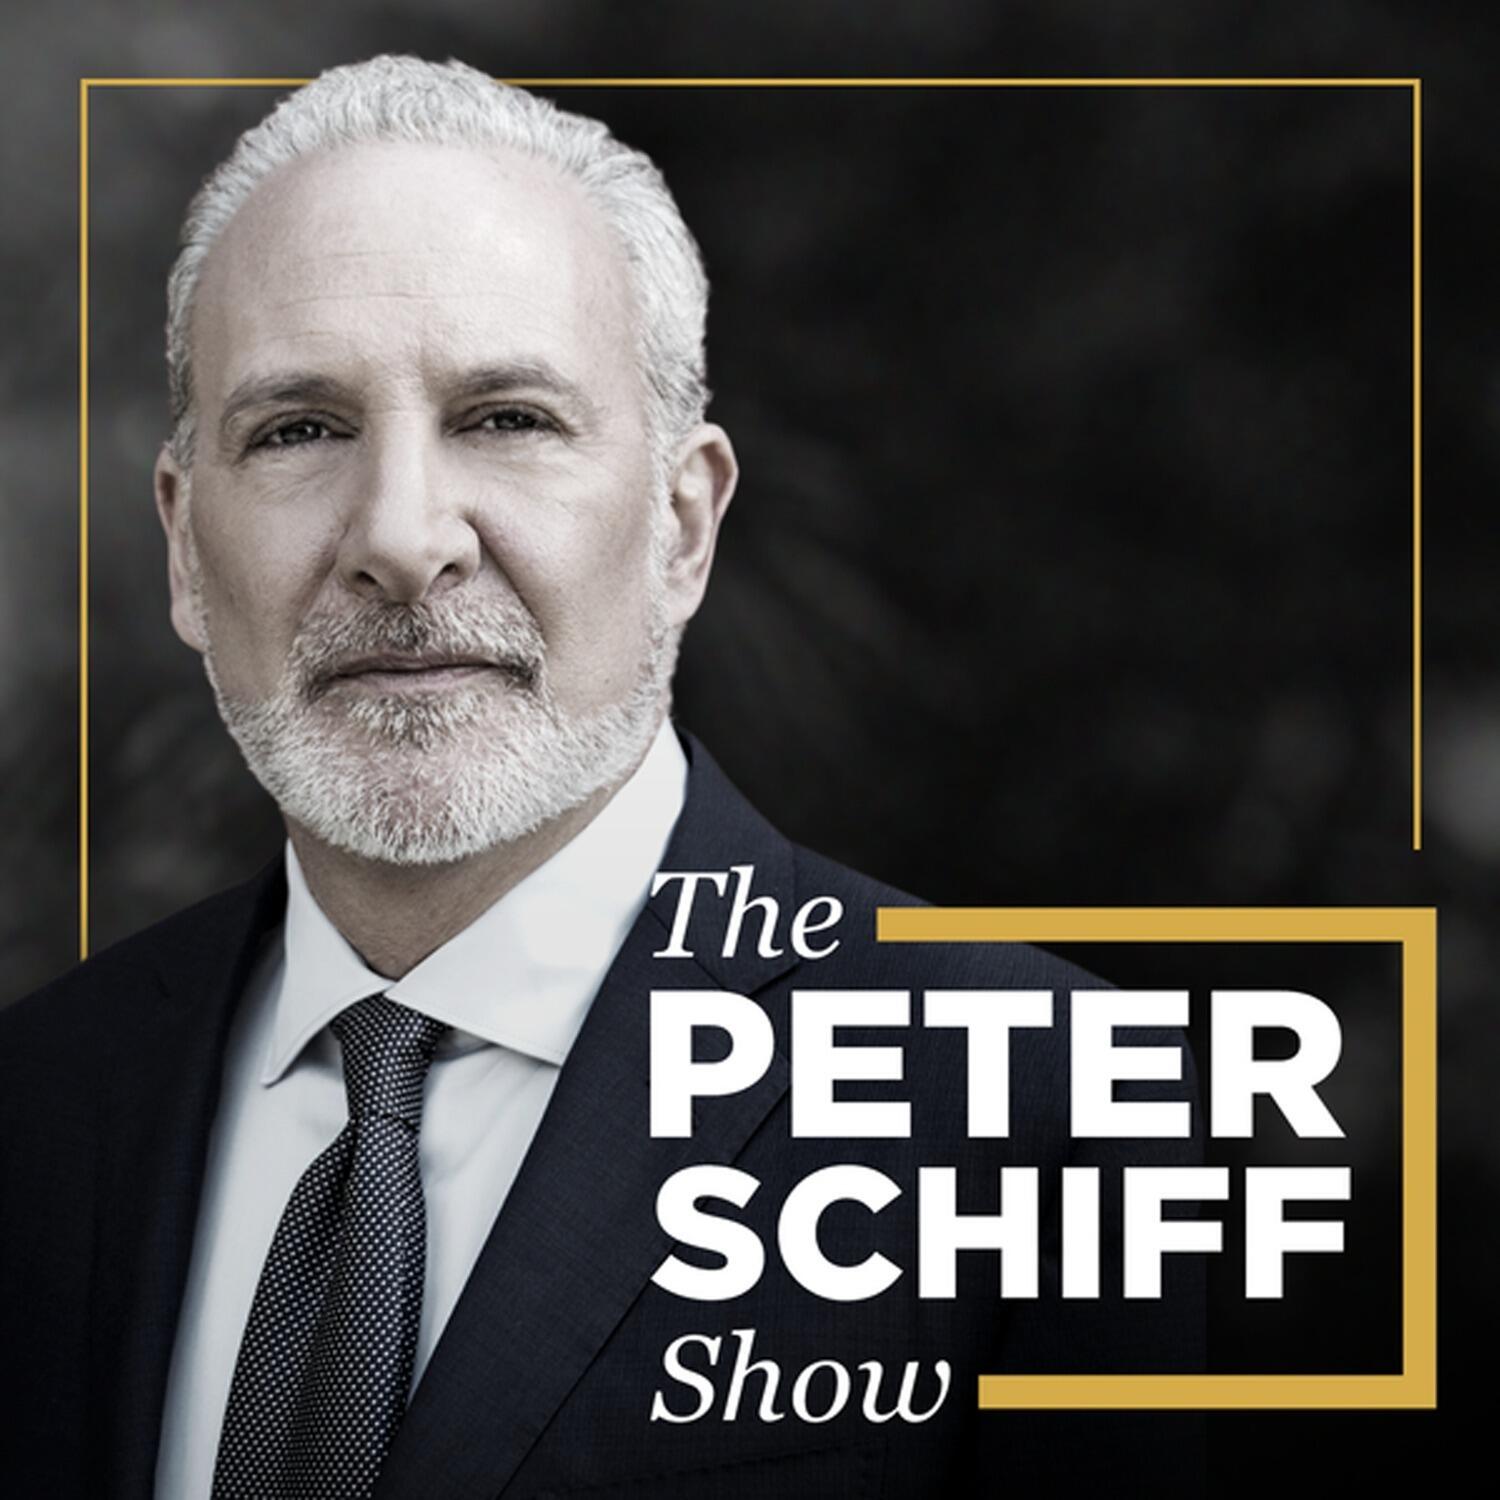 The Peter Schiff Show Podcast | iHeart